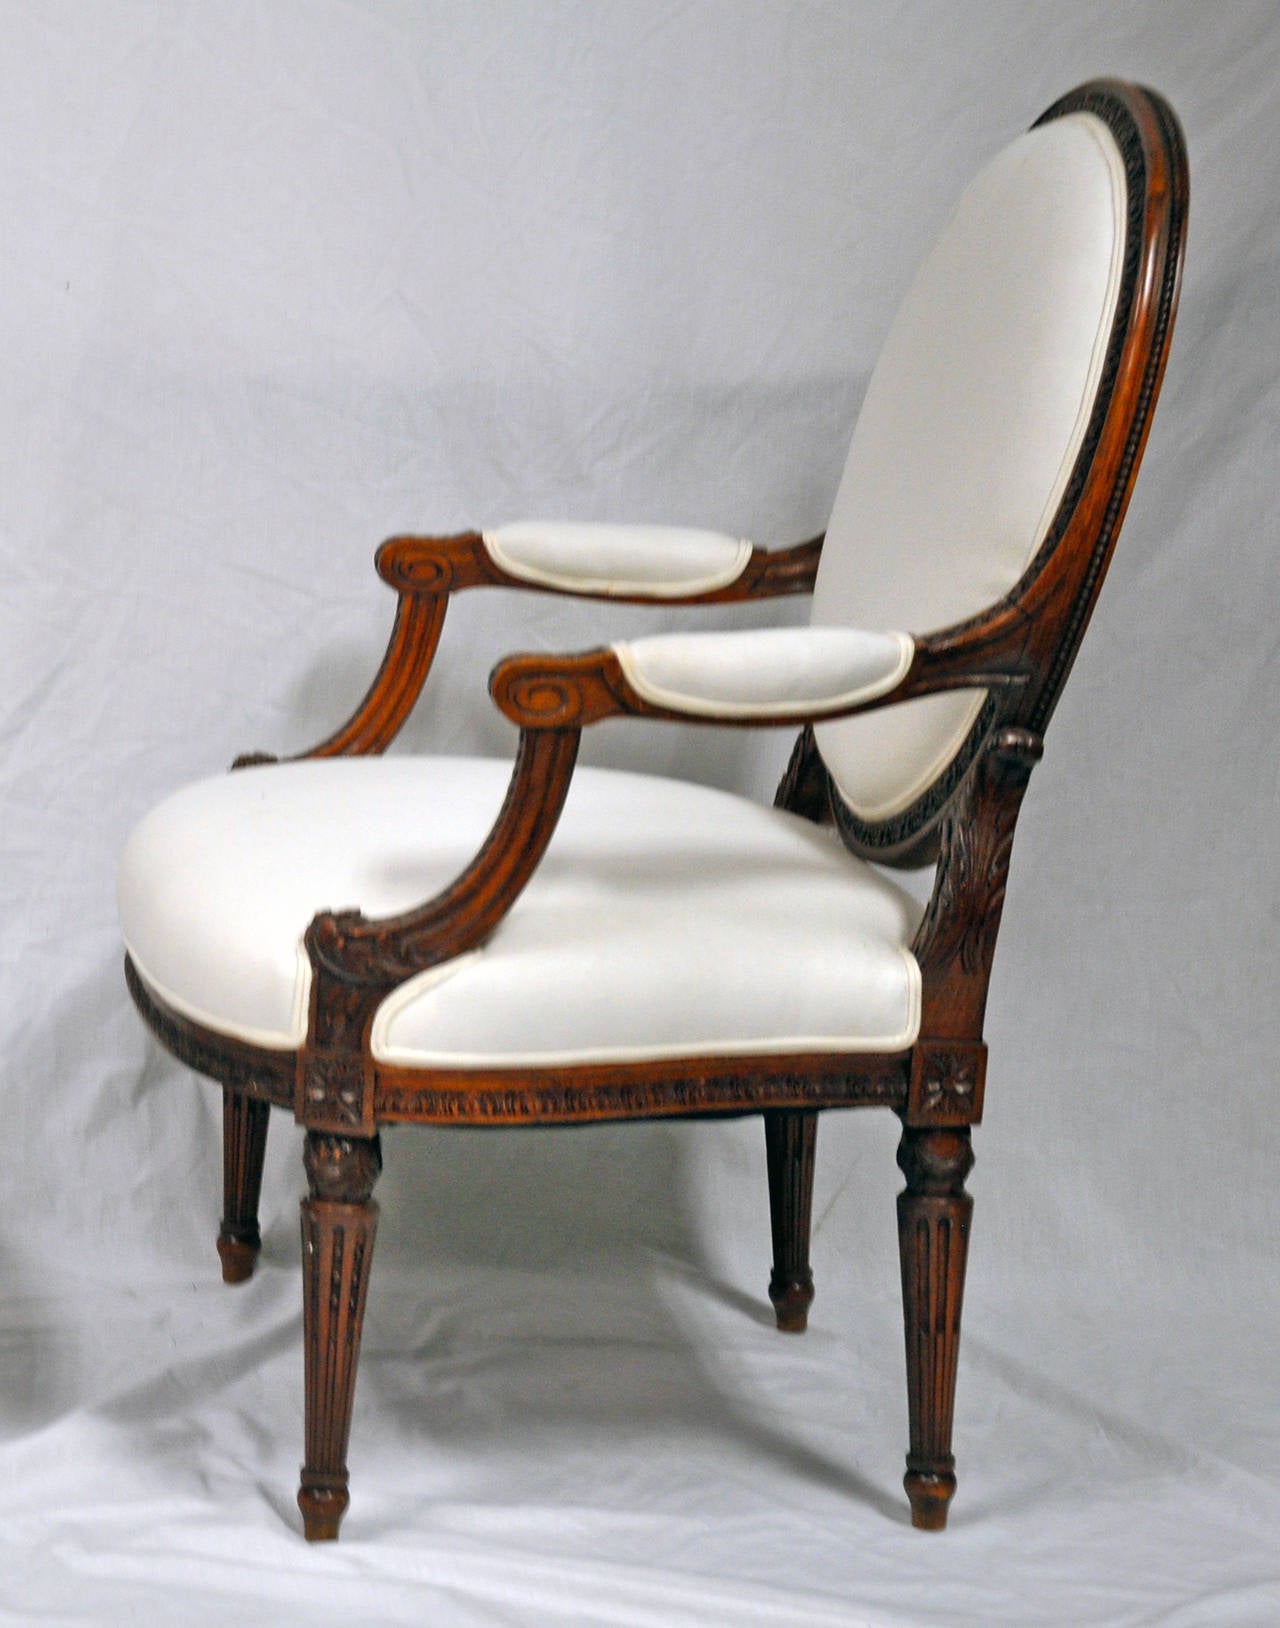 Pair of Classic Louis XVI styled fauteuil in great proportion and size for today with beautifully articulated carving in walnut. Newly upholstered in muslin. 

Established in 1979, Joyce Horn Antiques, ltd. continues its 36 year tradition of being